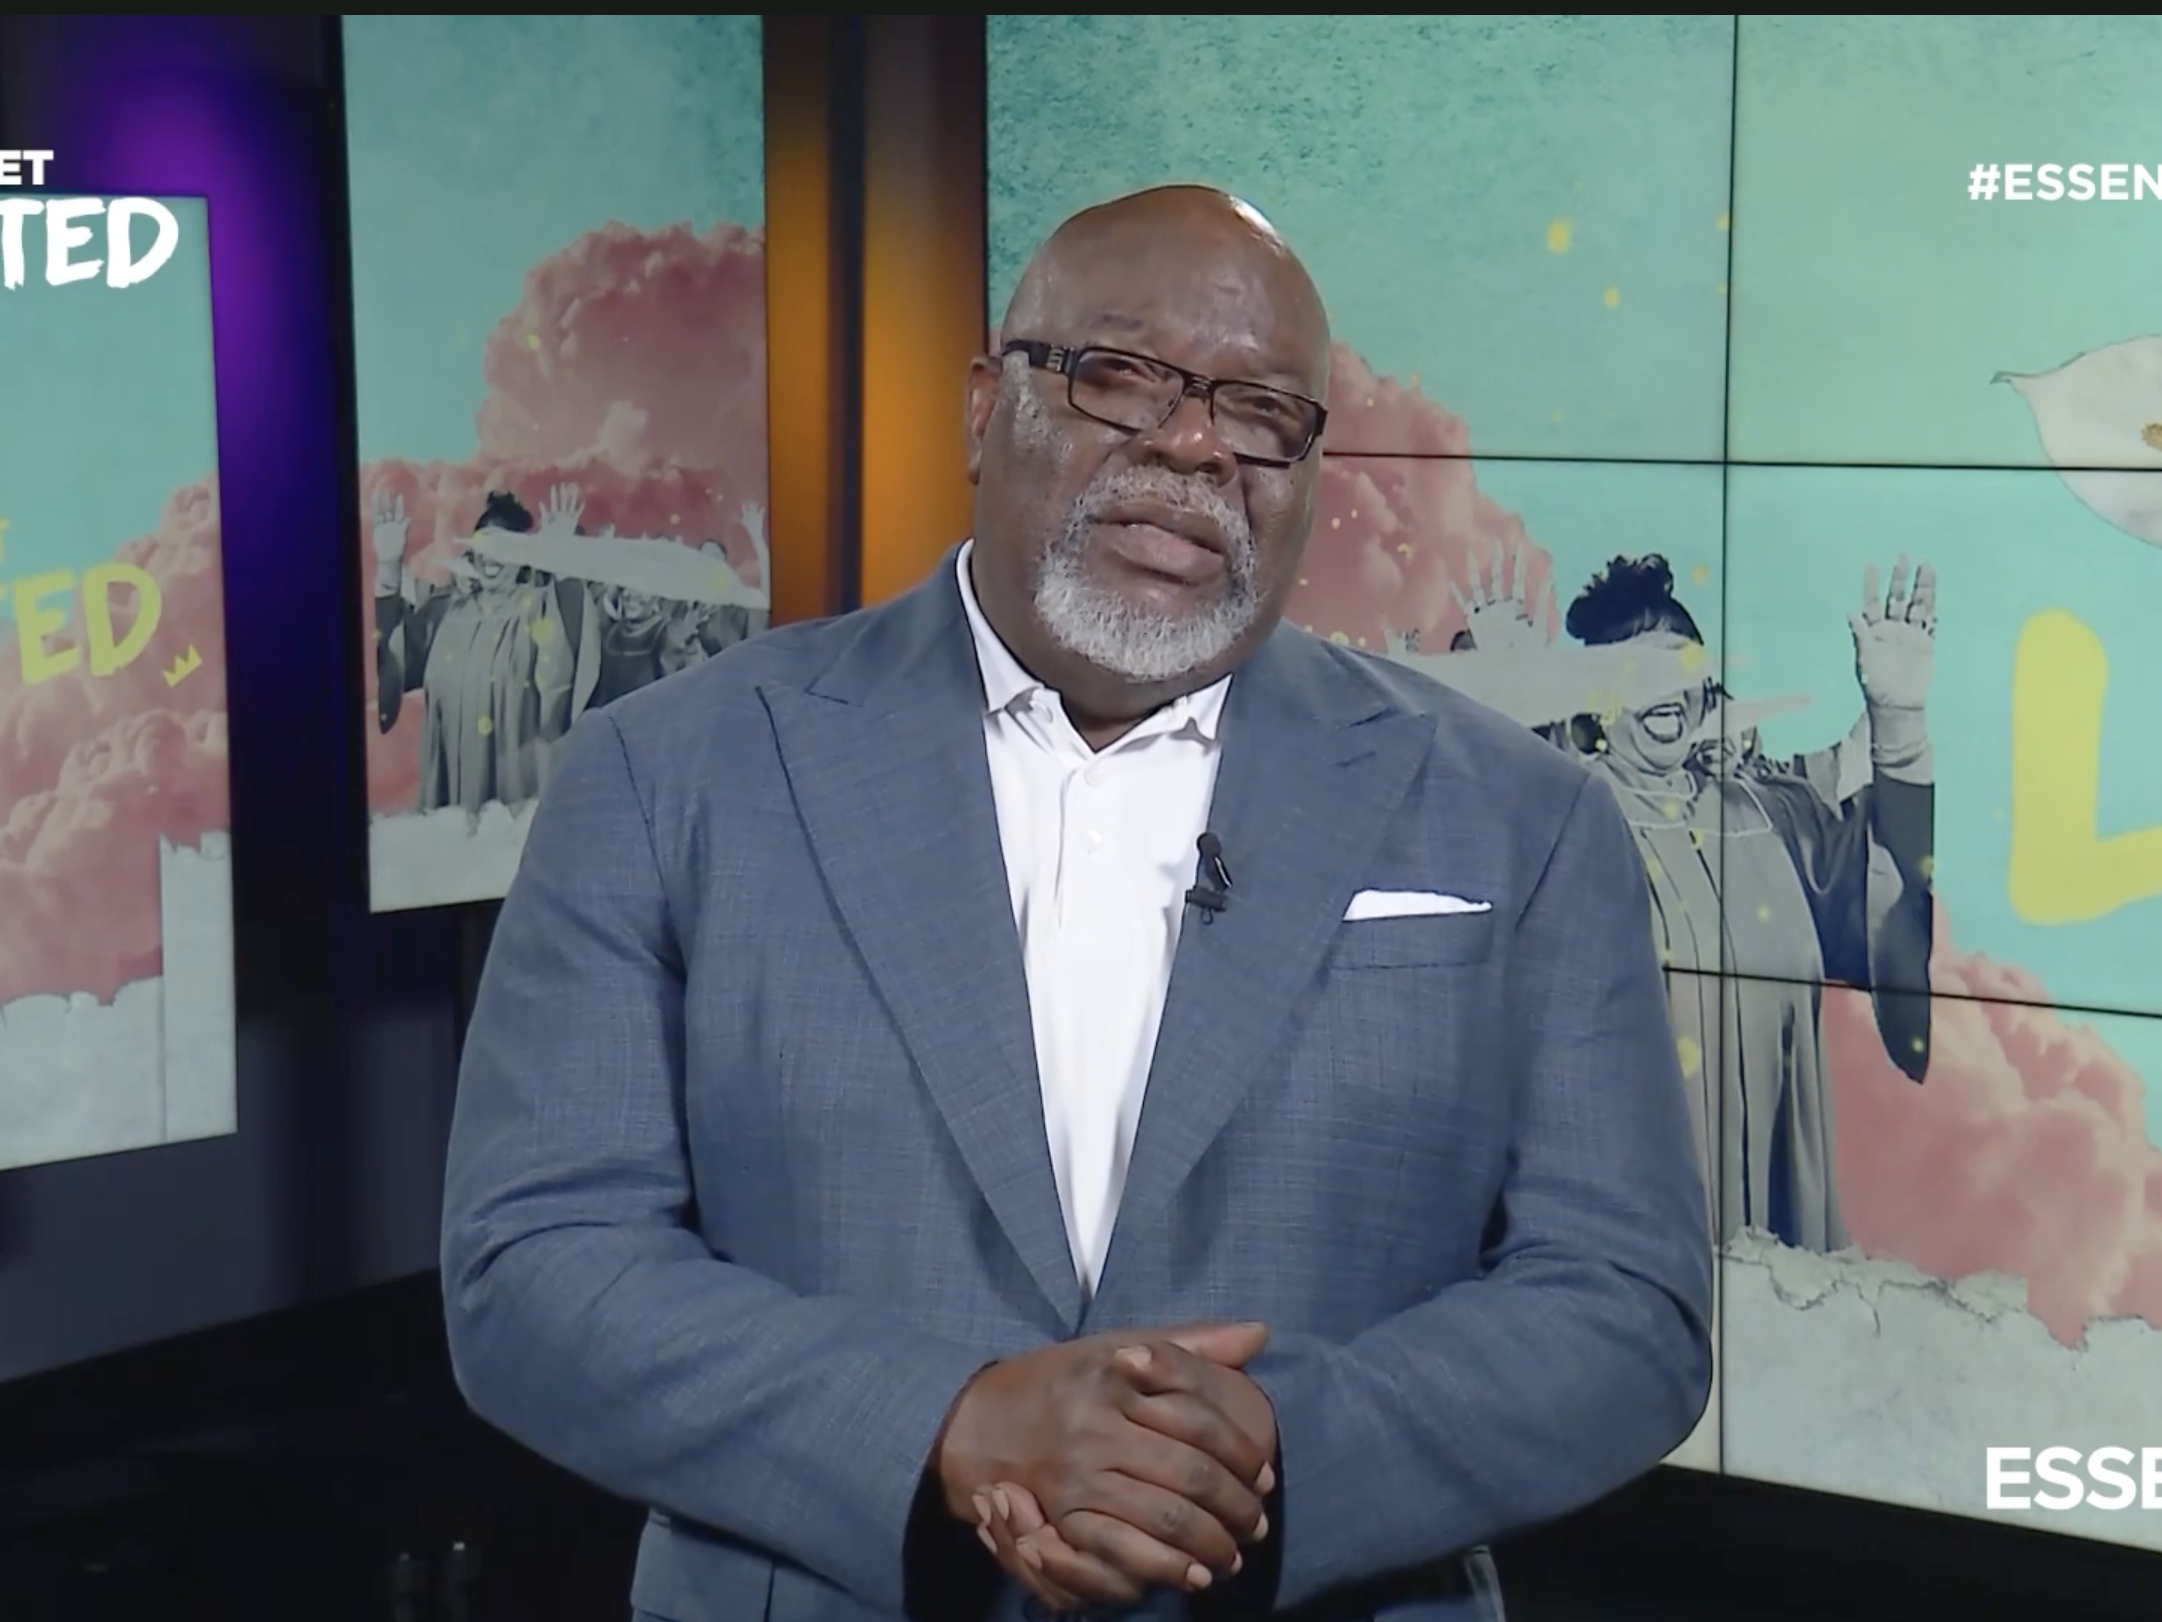 Bishop T.D. Jakes Welcomes People to the Get Lifted Sunday Celebration 2020